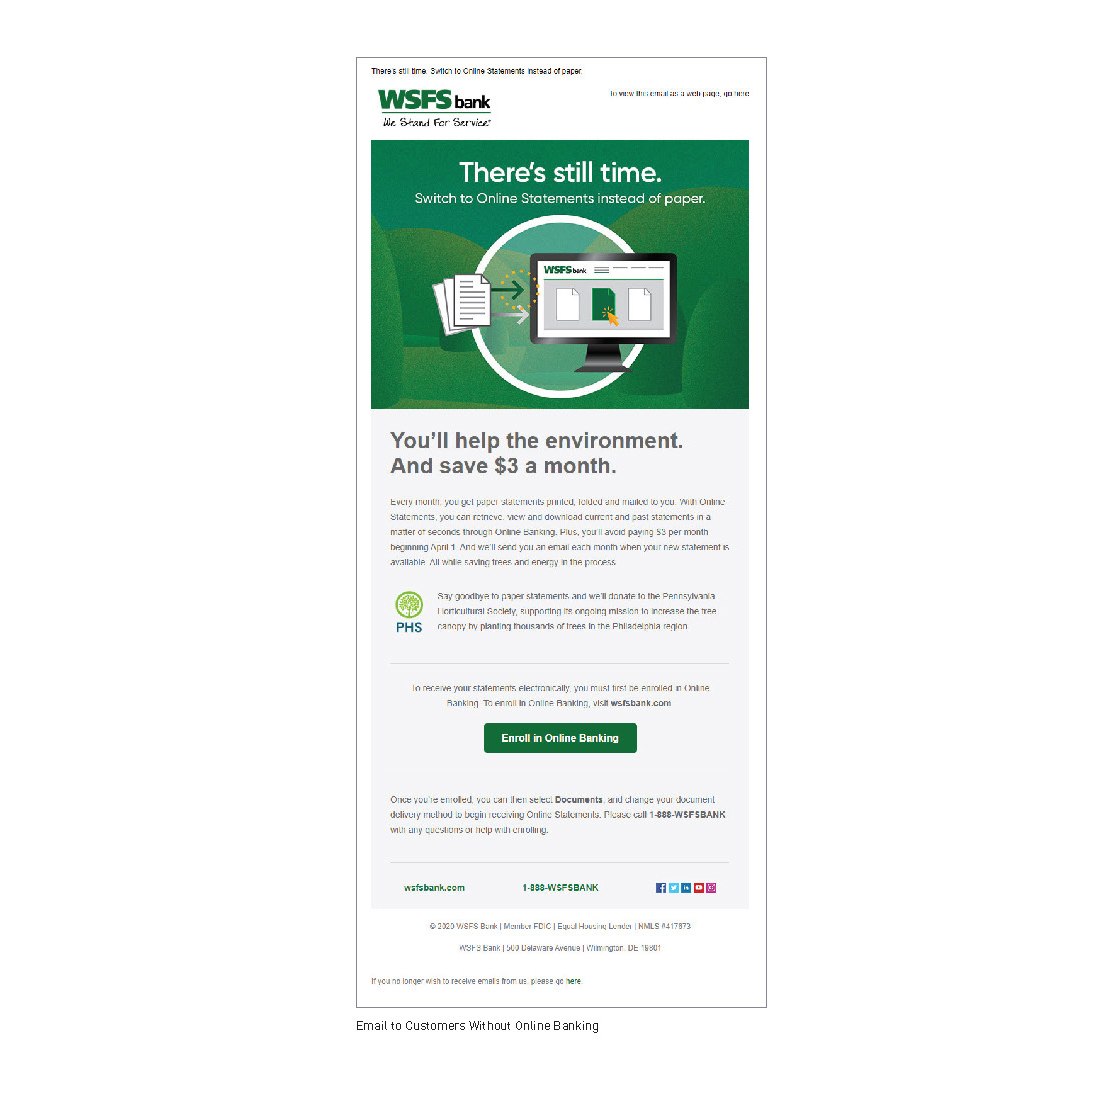 WSFS Bank email to campus banking customers without online banking